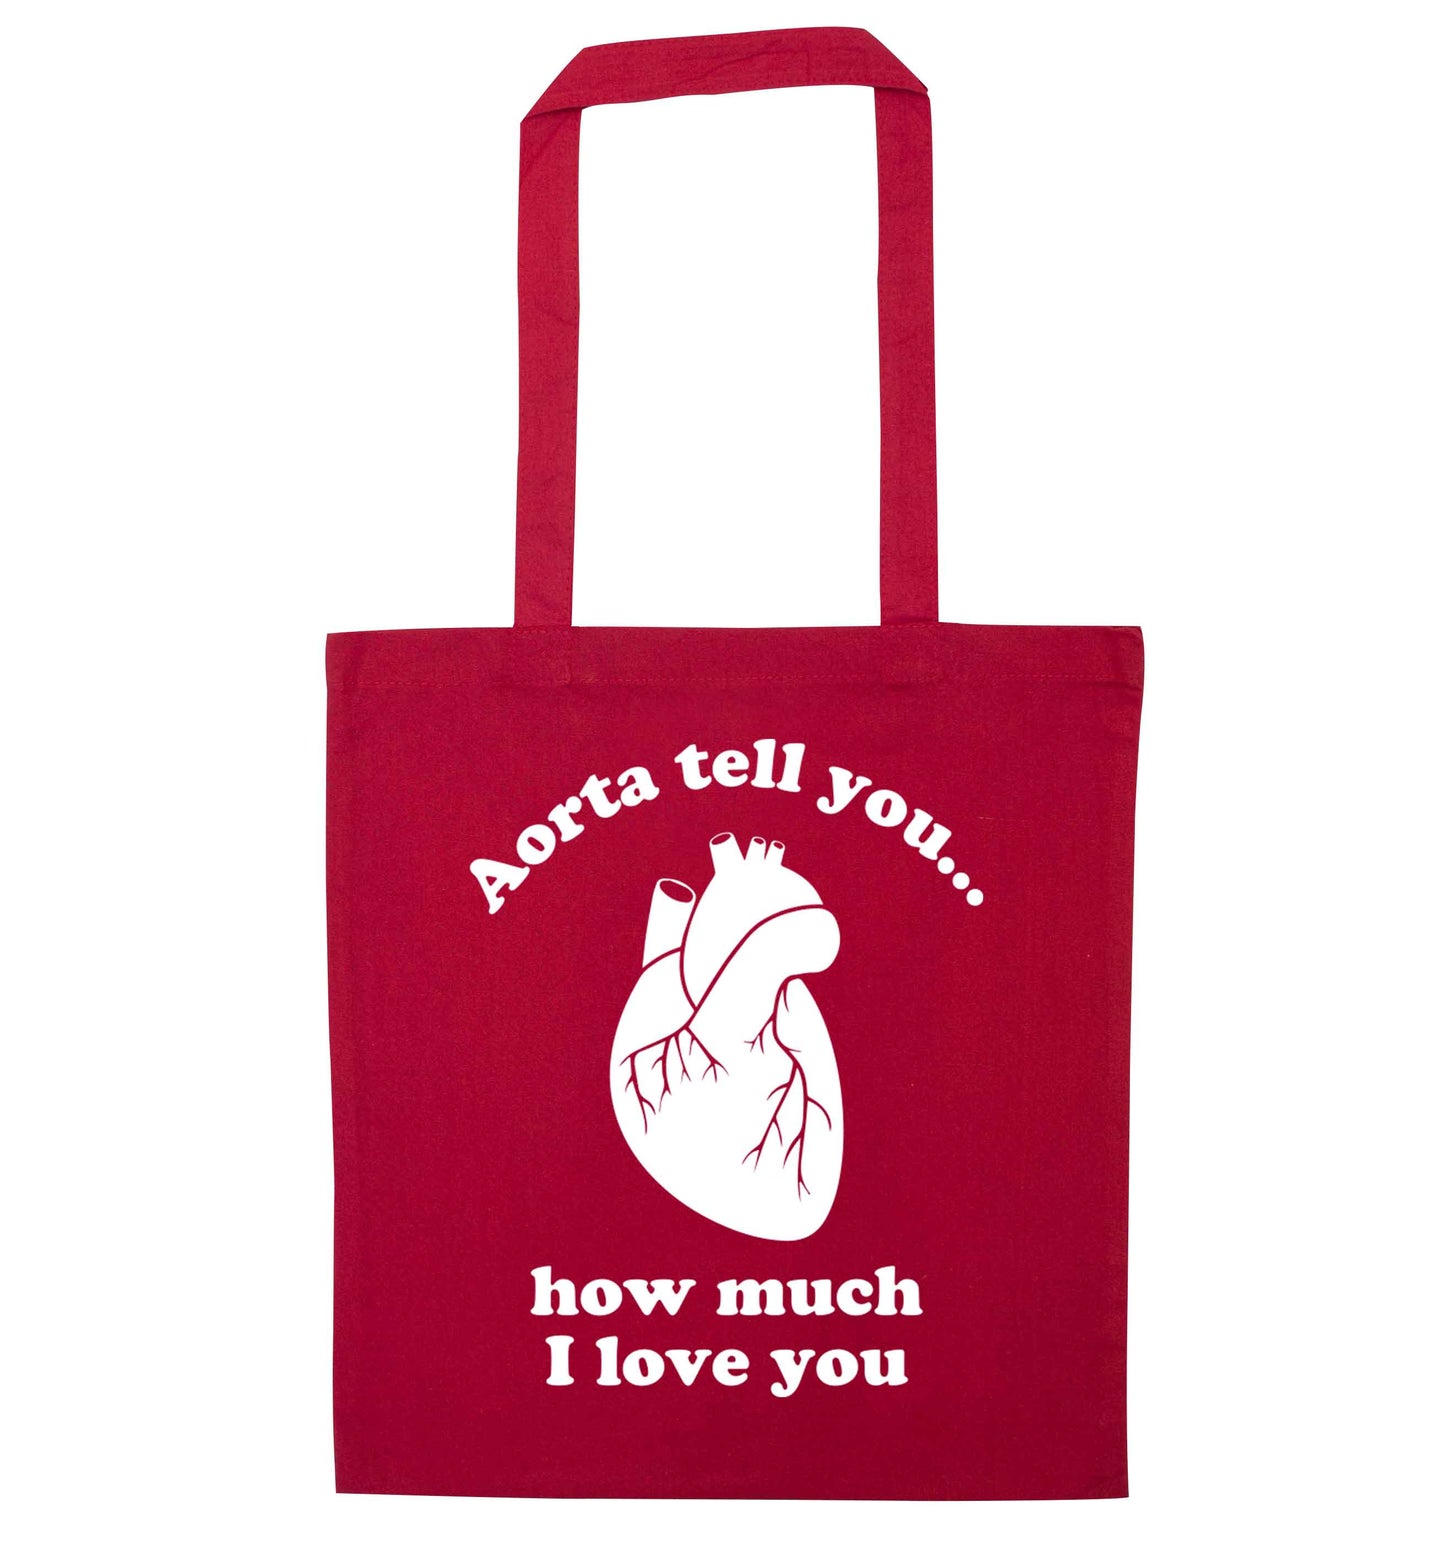 Aorta tell you how much I love you red tote bag